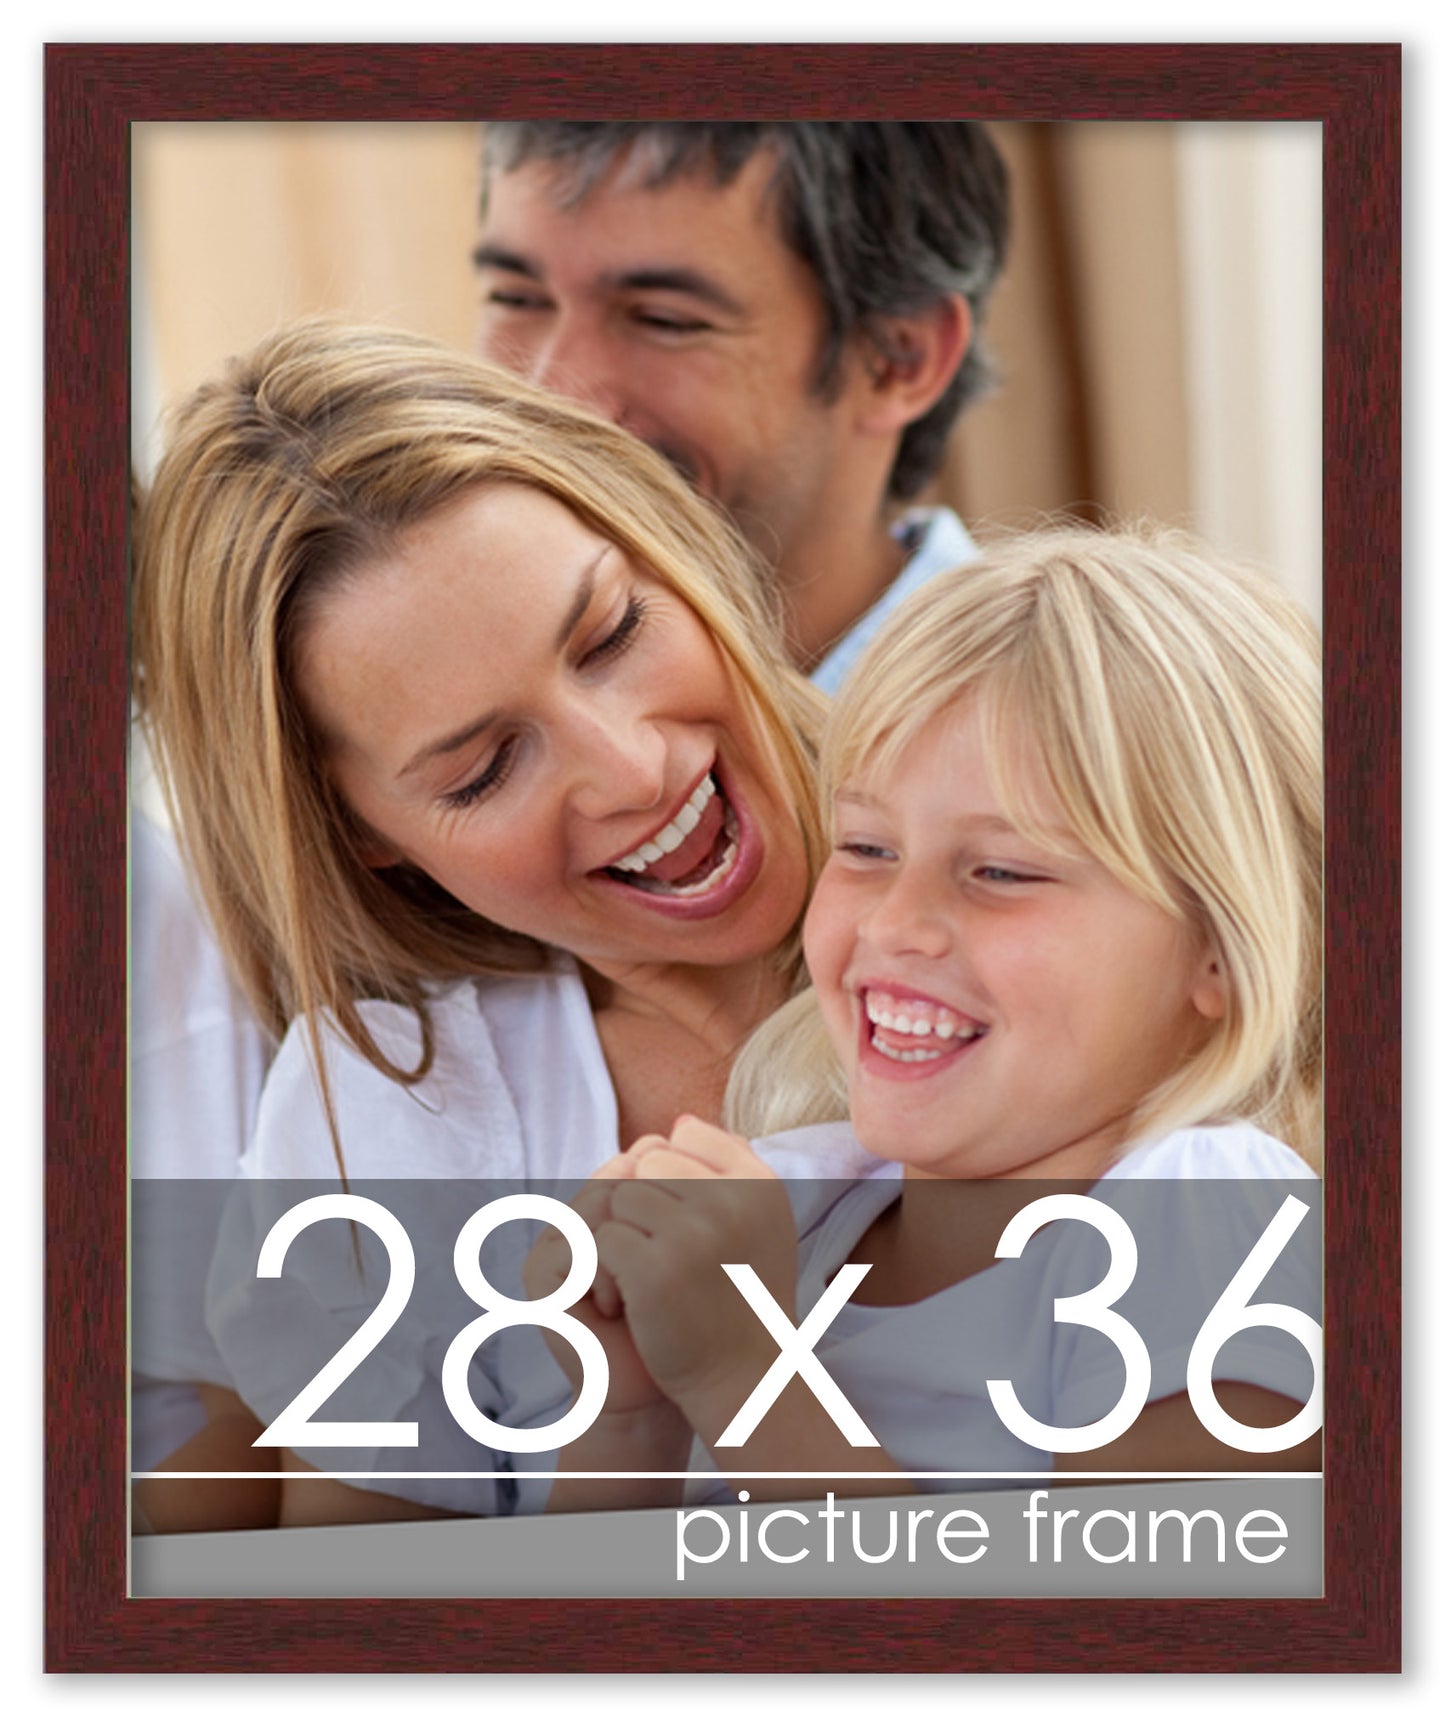 Traditional Walnut Wood Picture Frame